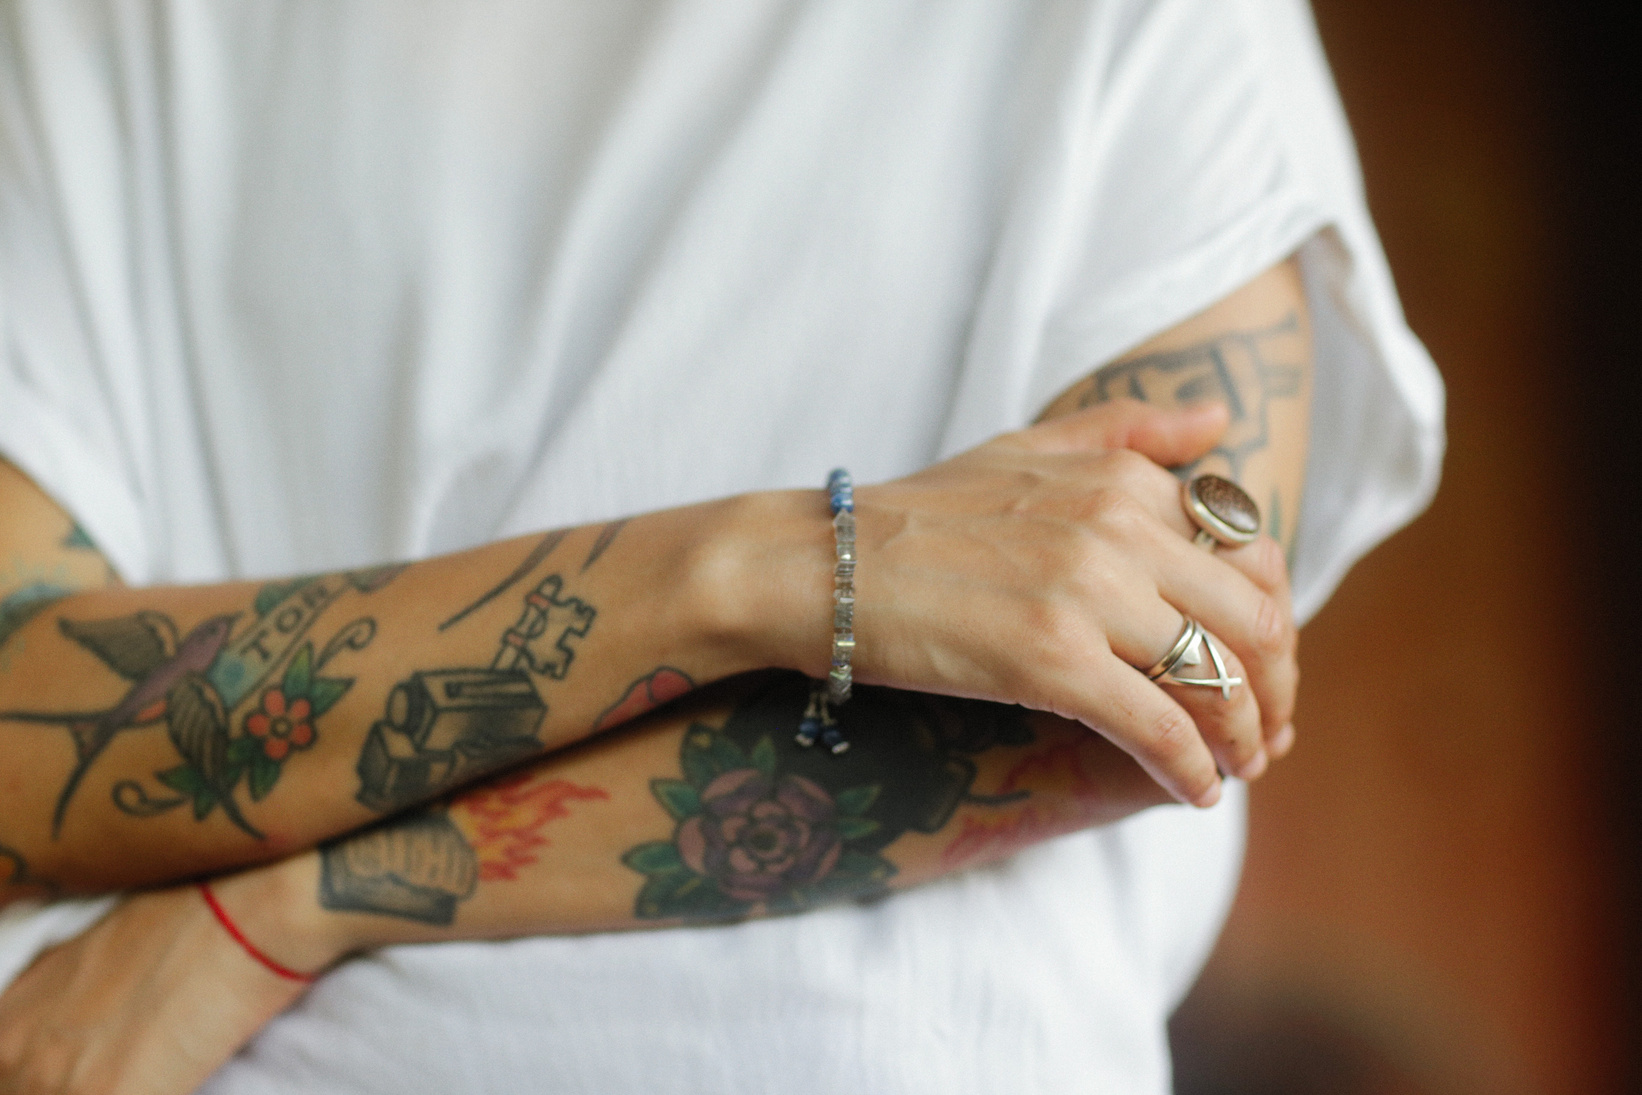 Hands with Tattoos